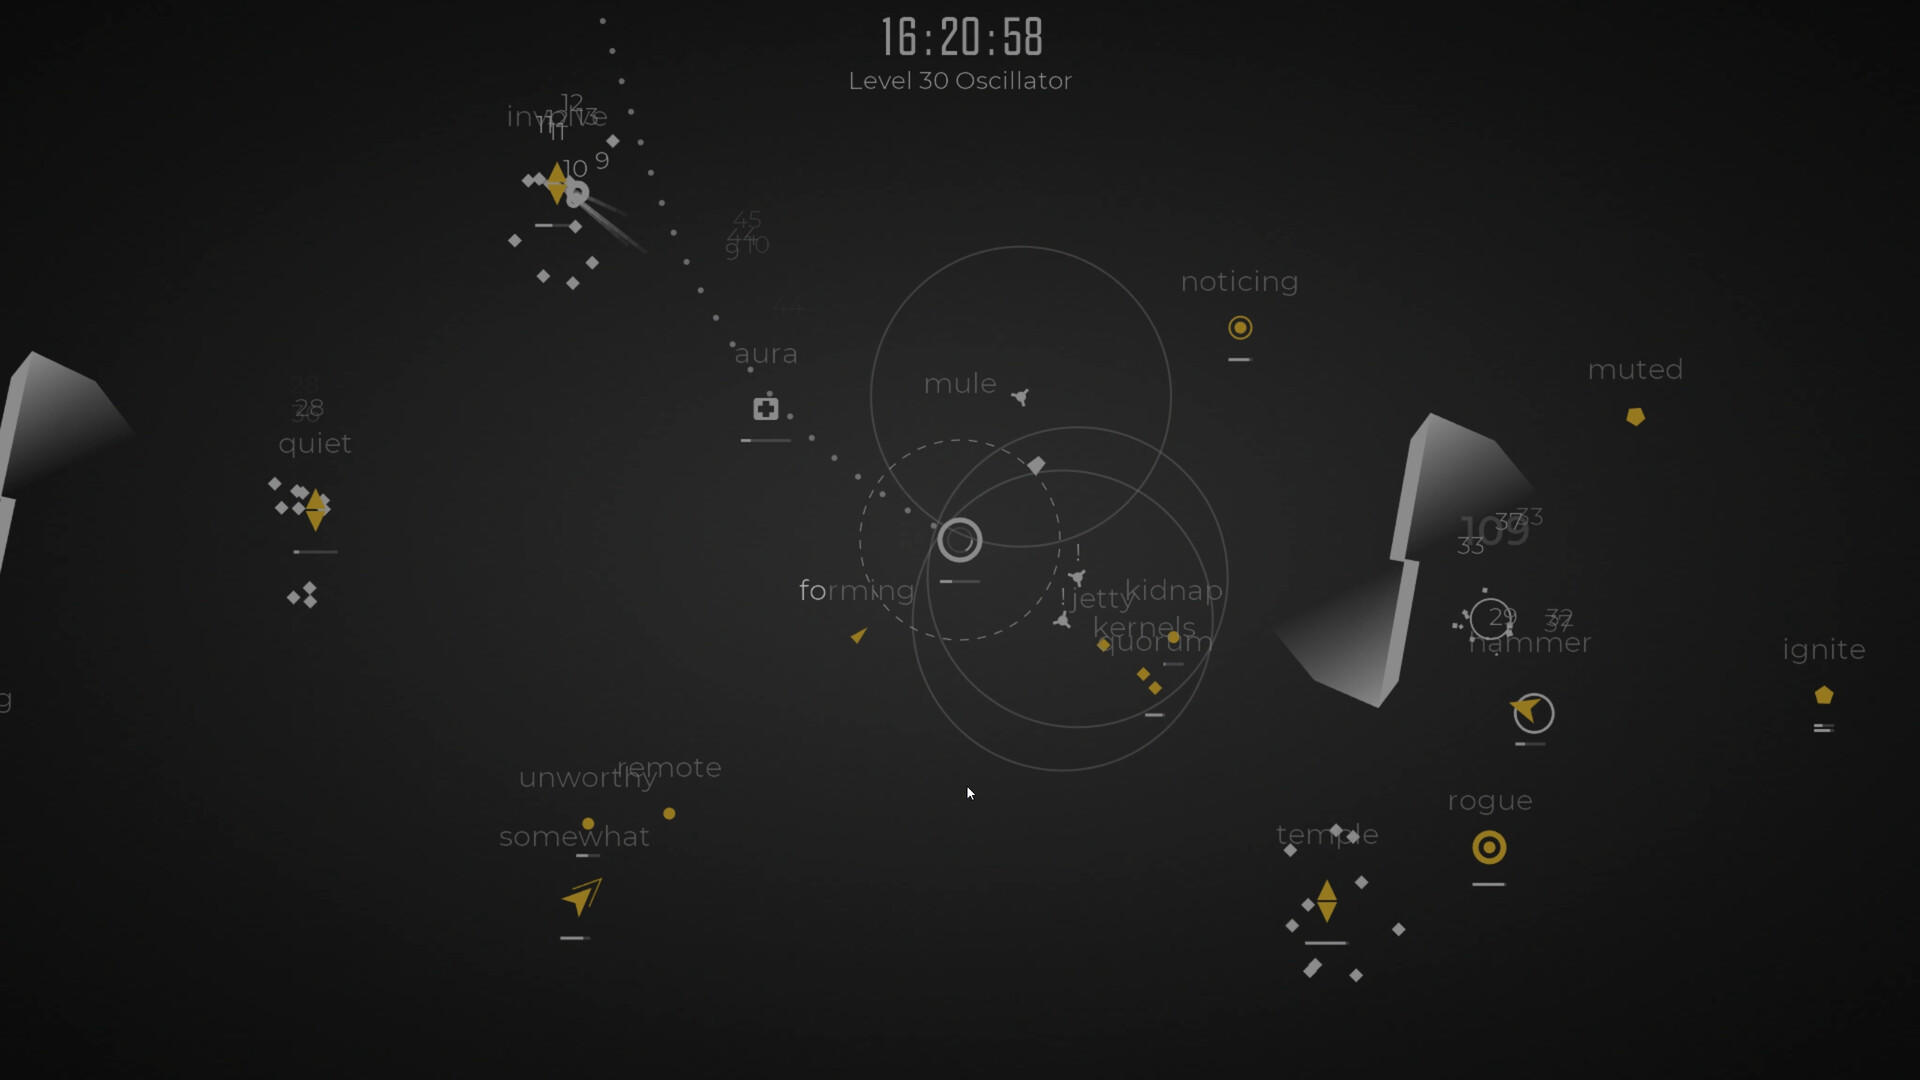 Glyphica: Typing Survival screenshot game